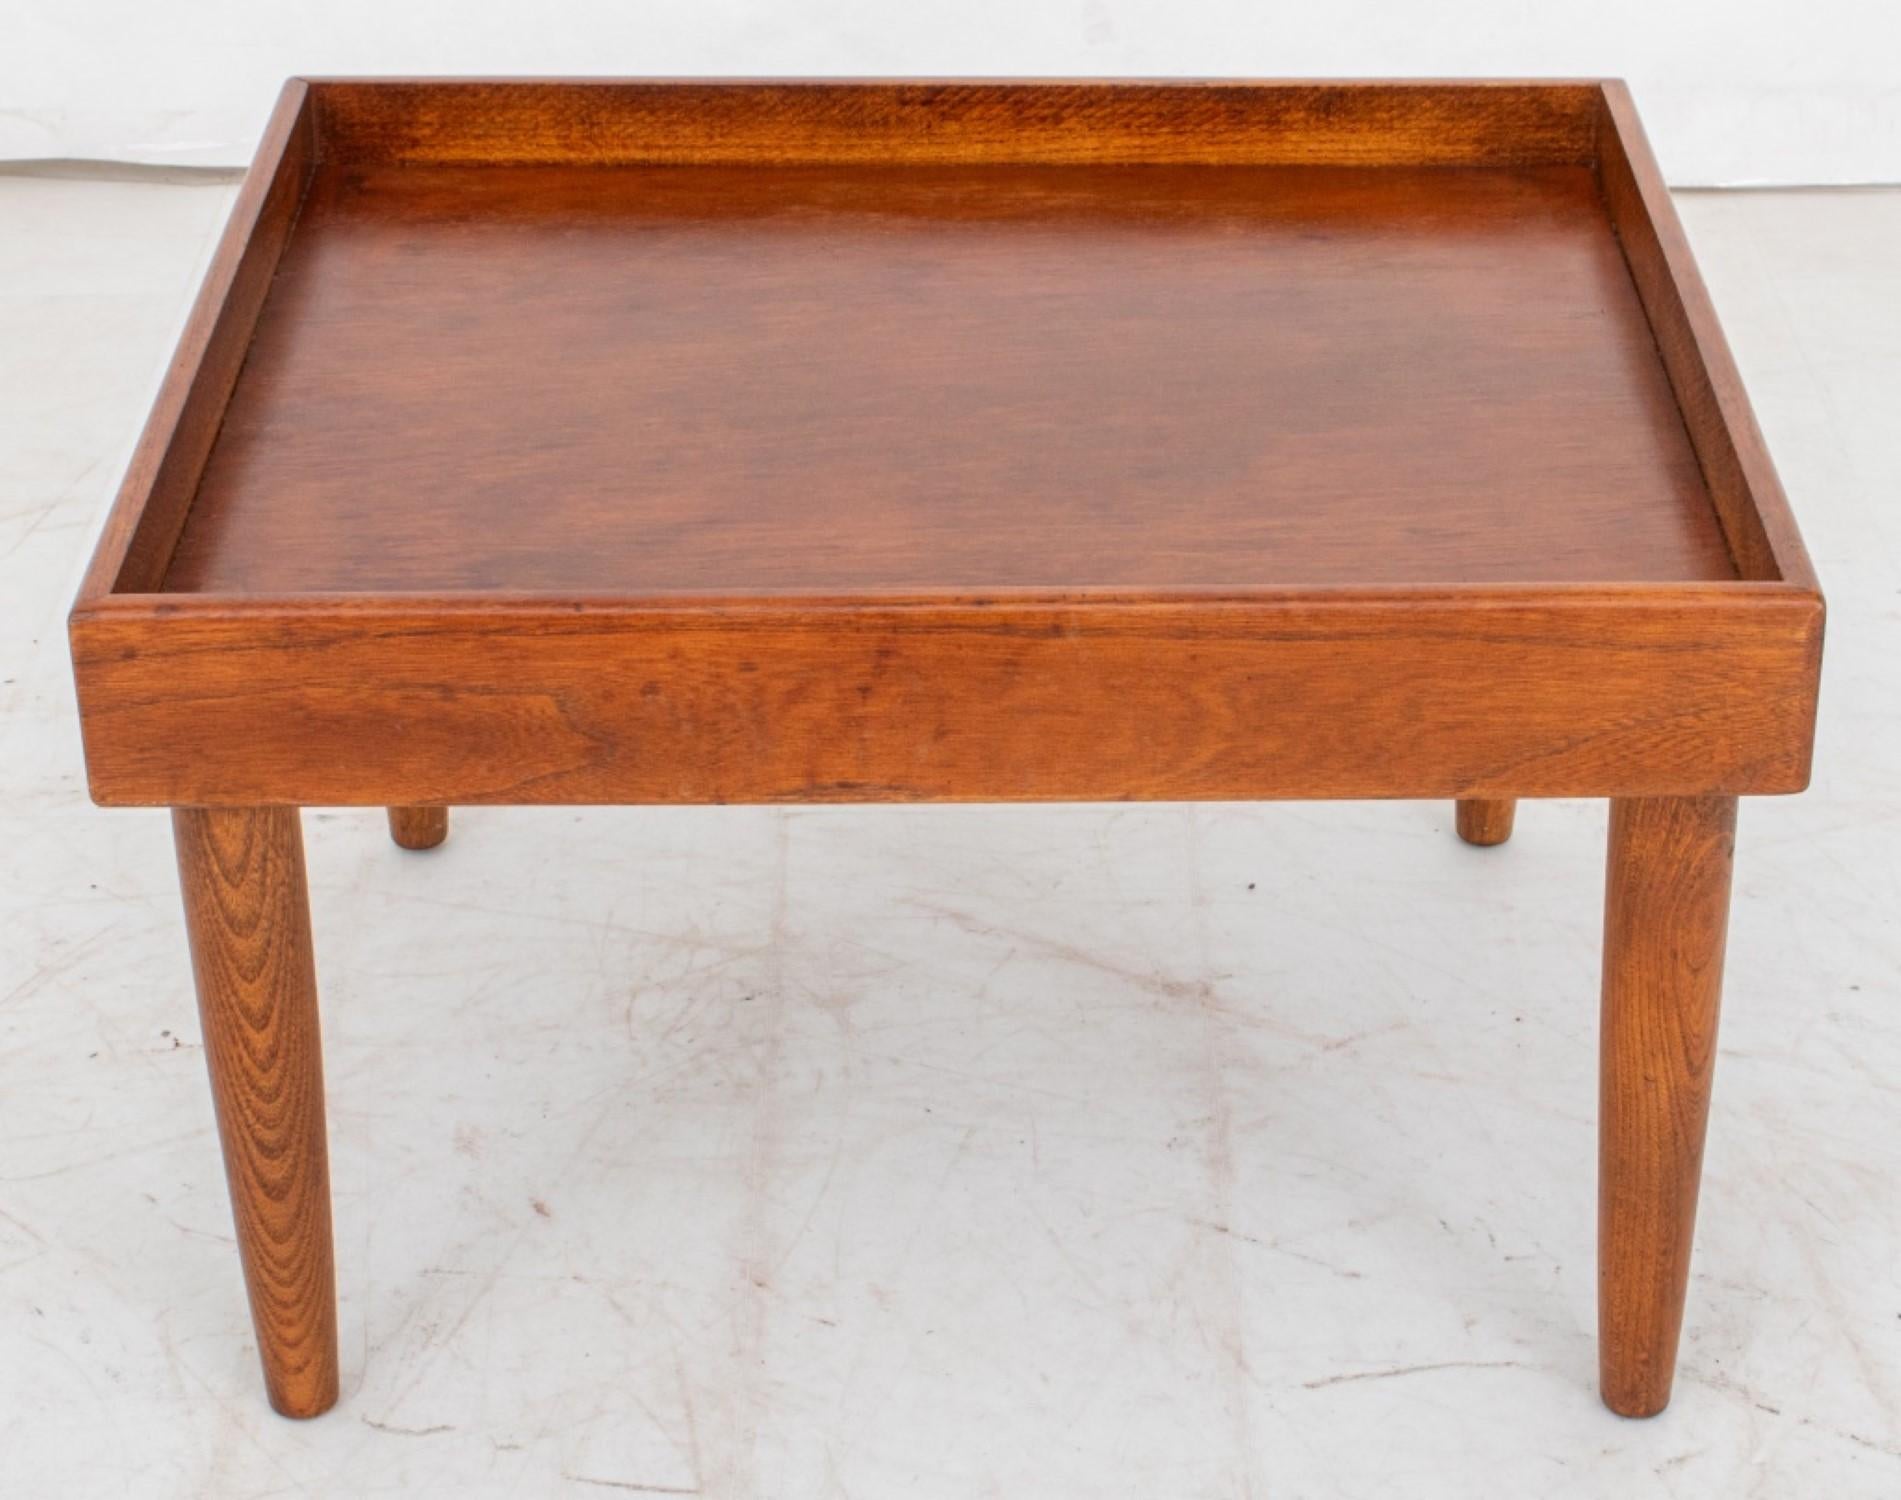 Mid-Century Small Walnut Low Coffee Table

Design: Mid-Century Modern style with four tapered legs.
Dimensions: 13.75